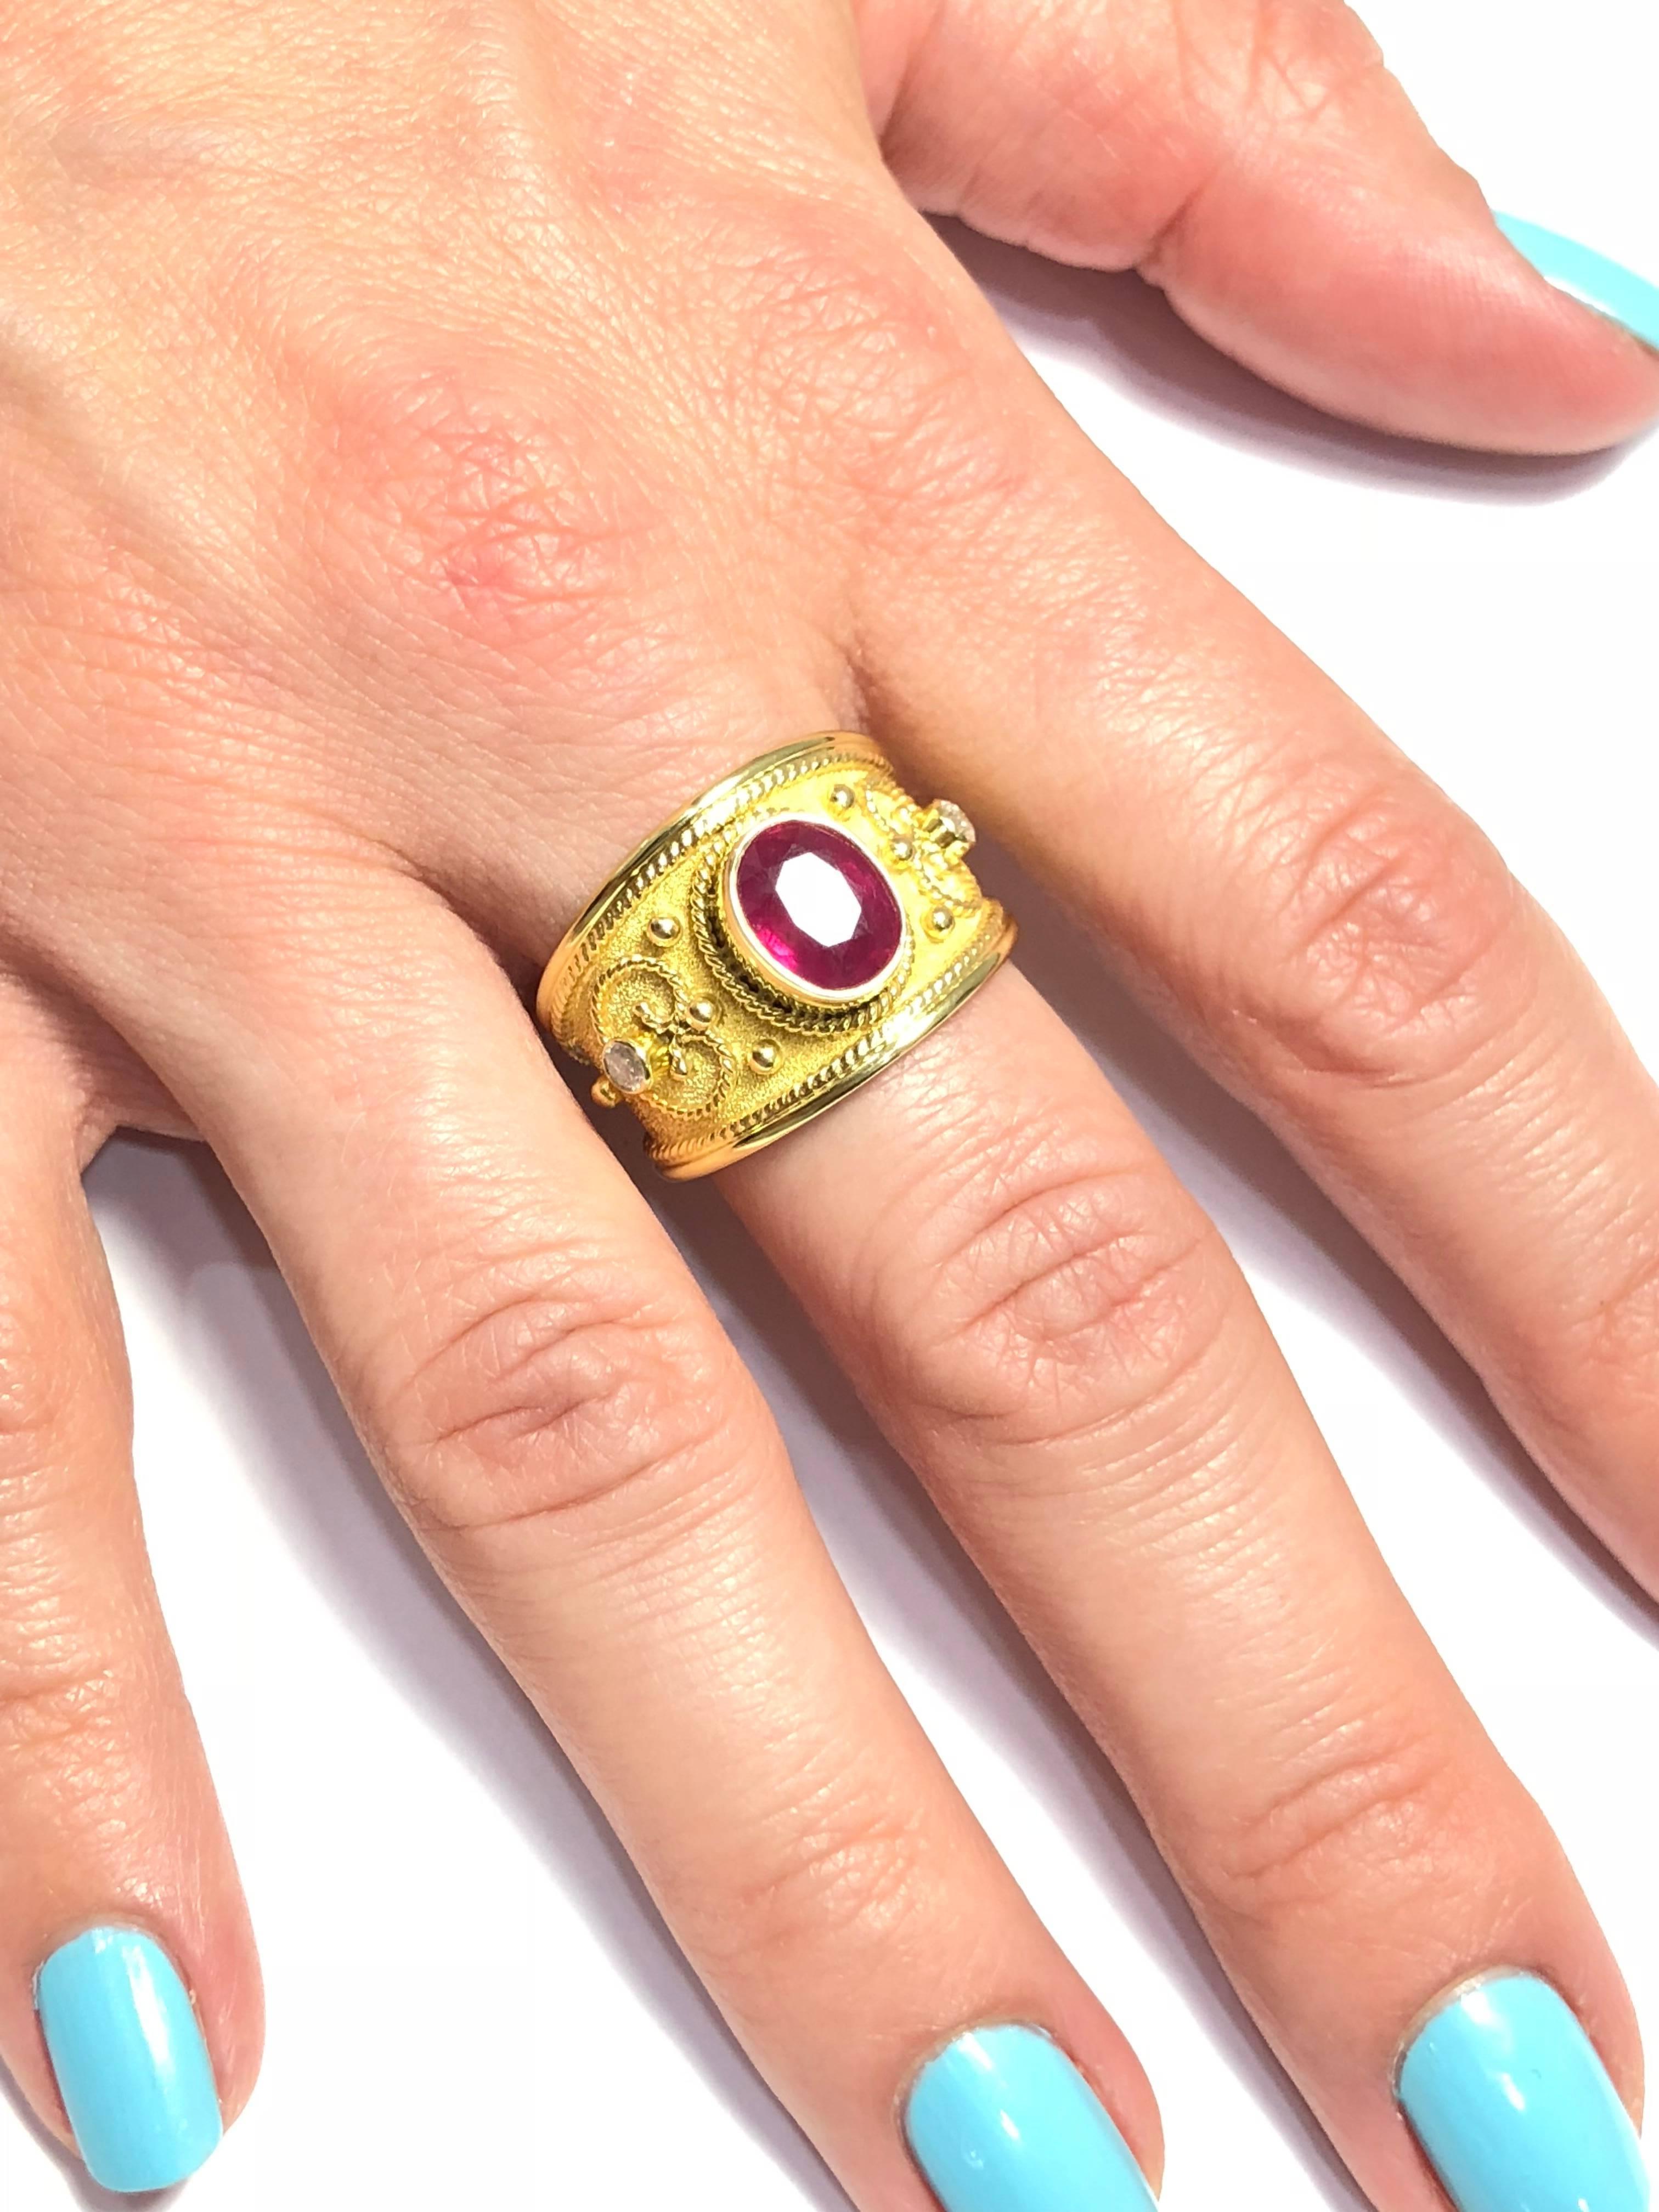 S.Georgios designer 18 Karat Solid Yellow Gold Ring all handmade with the Byzantine Style workmanship and a unique velvet background. The ring features a 2.58 Carat Natural Ruby which has been heated to enhance the color density, 2 Brilliant cut